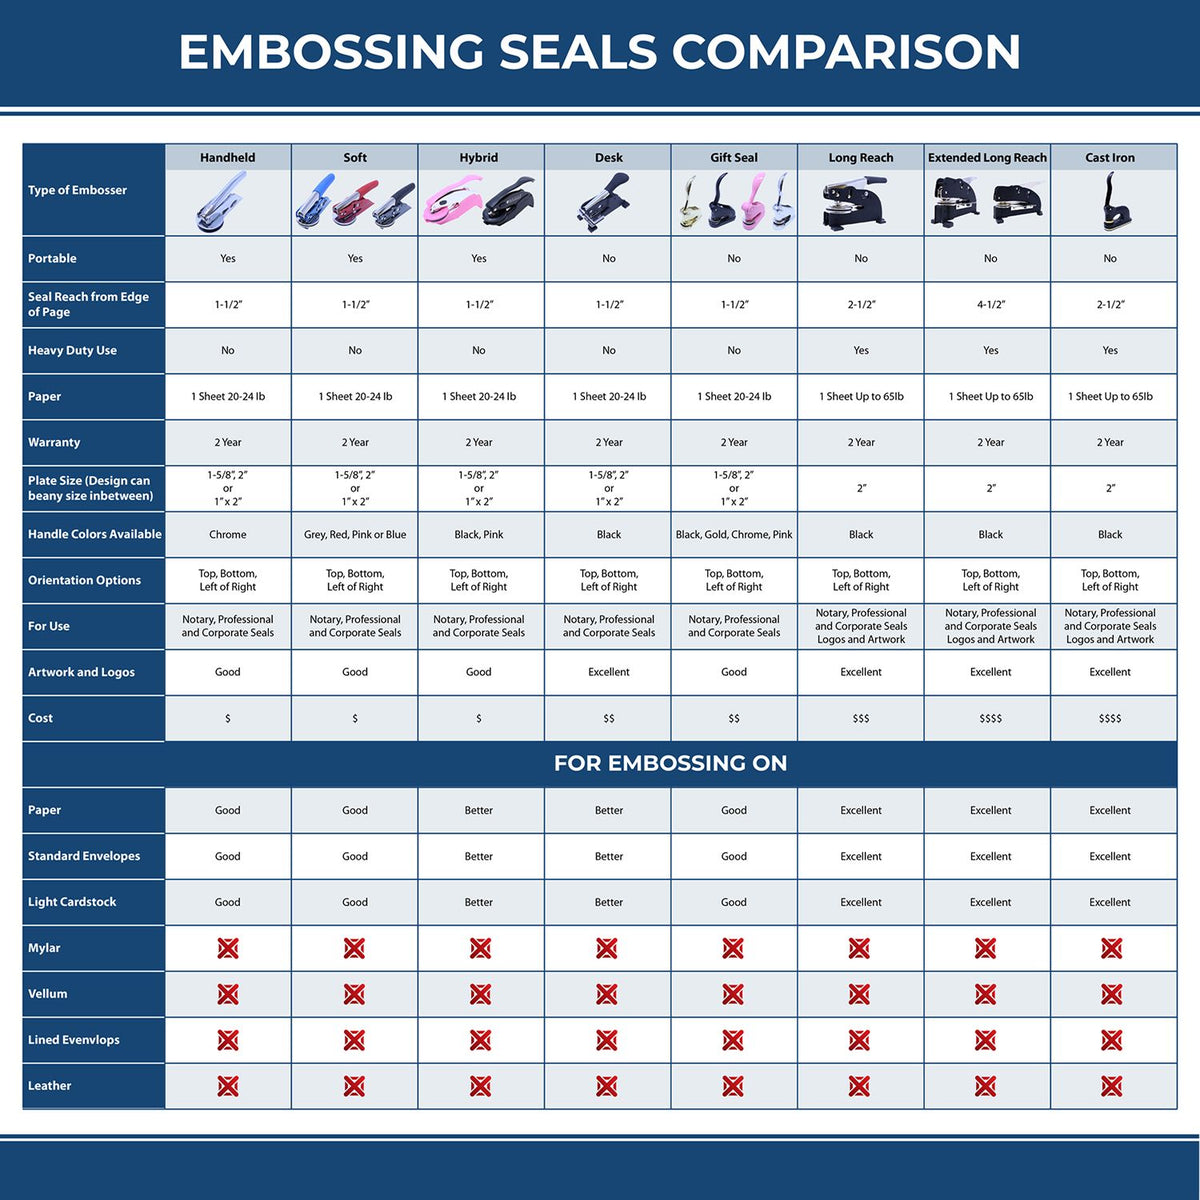 A comparison chart for the different types of mount models available for the Washington Desk Architect Embossing Seal.